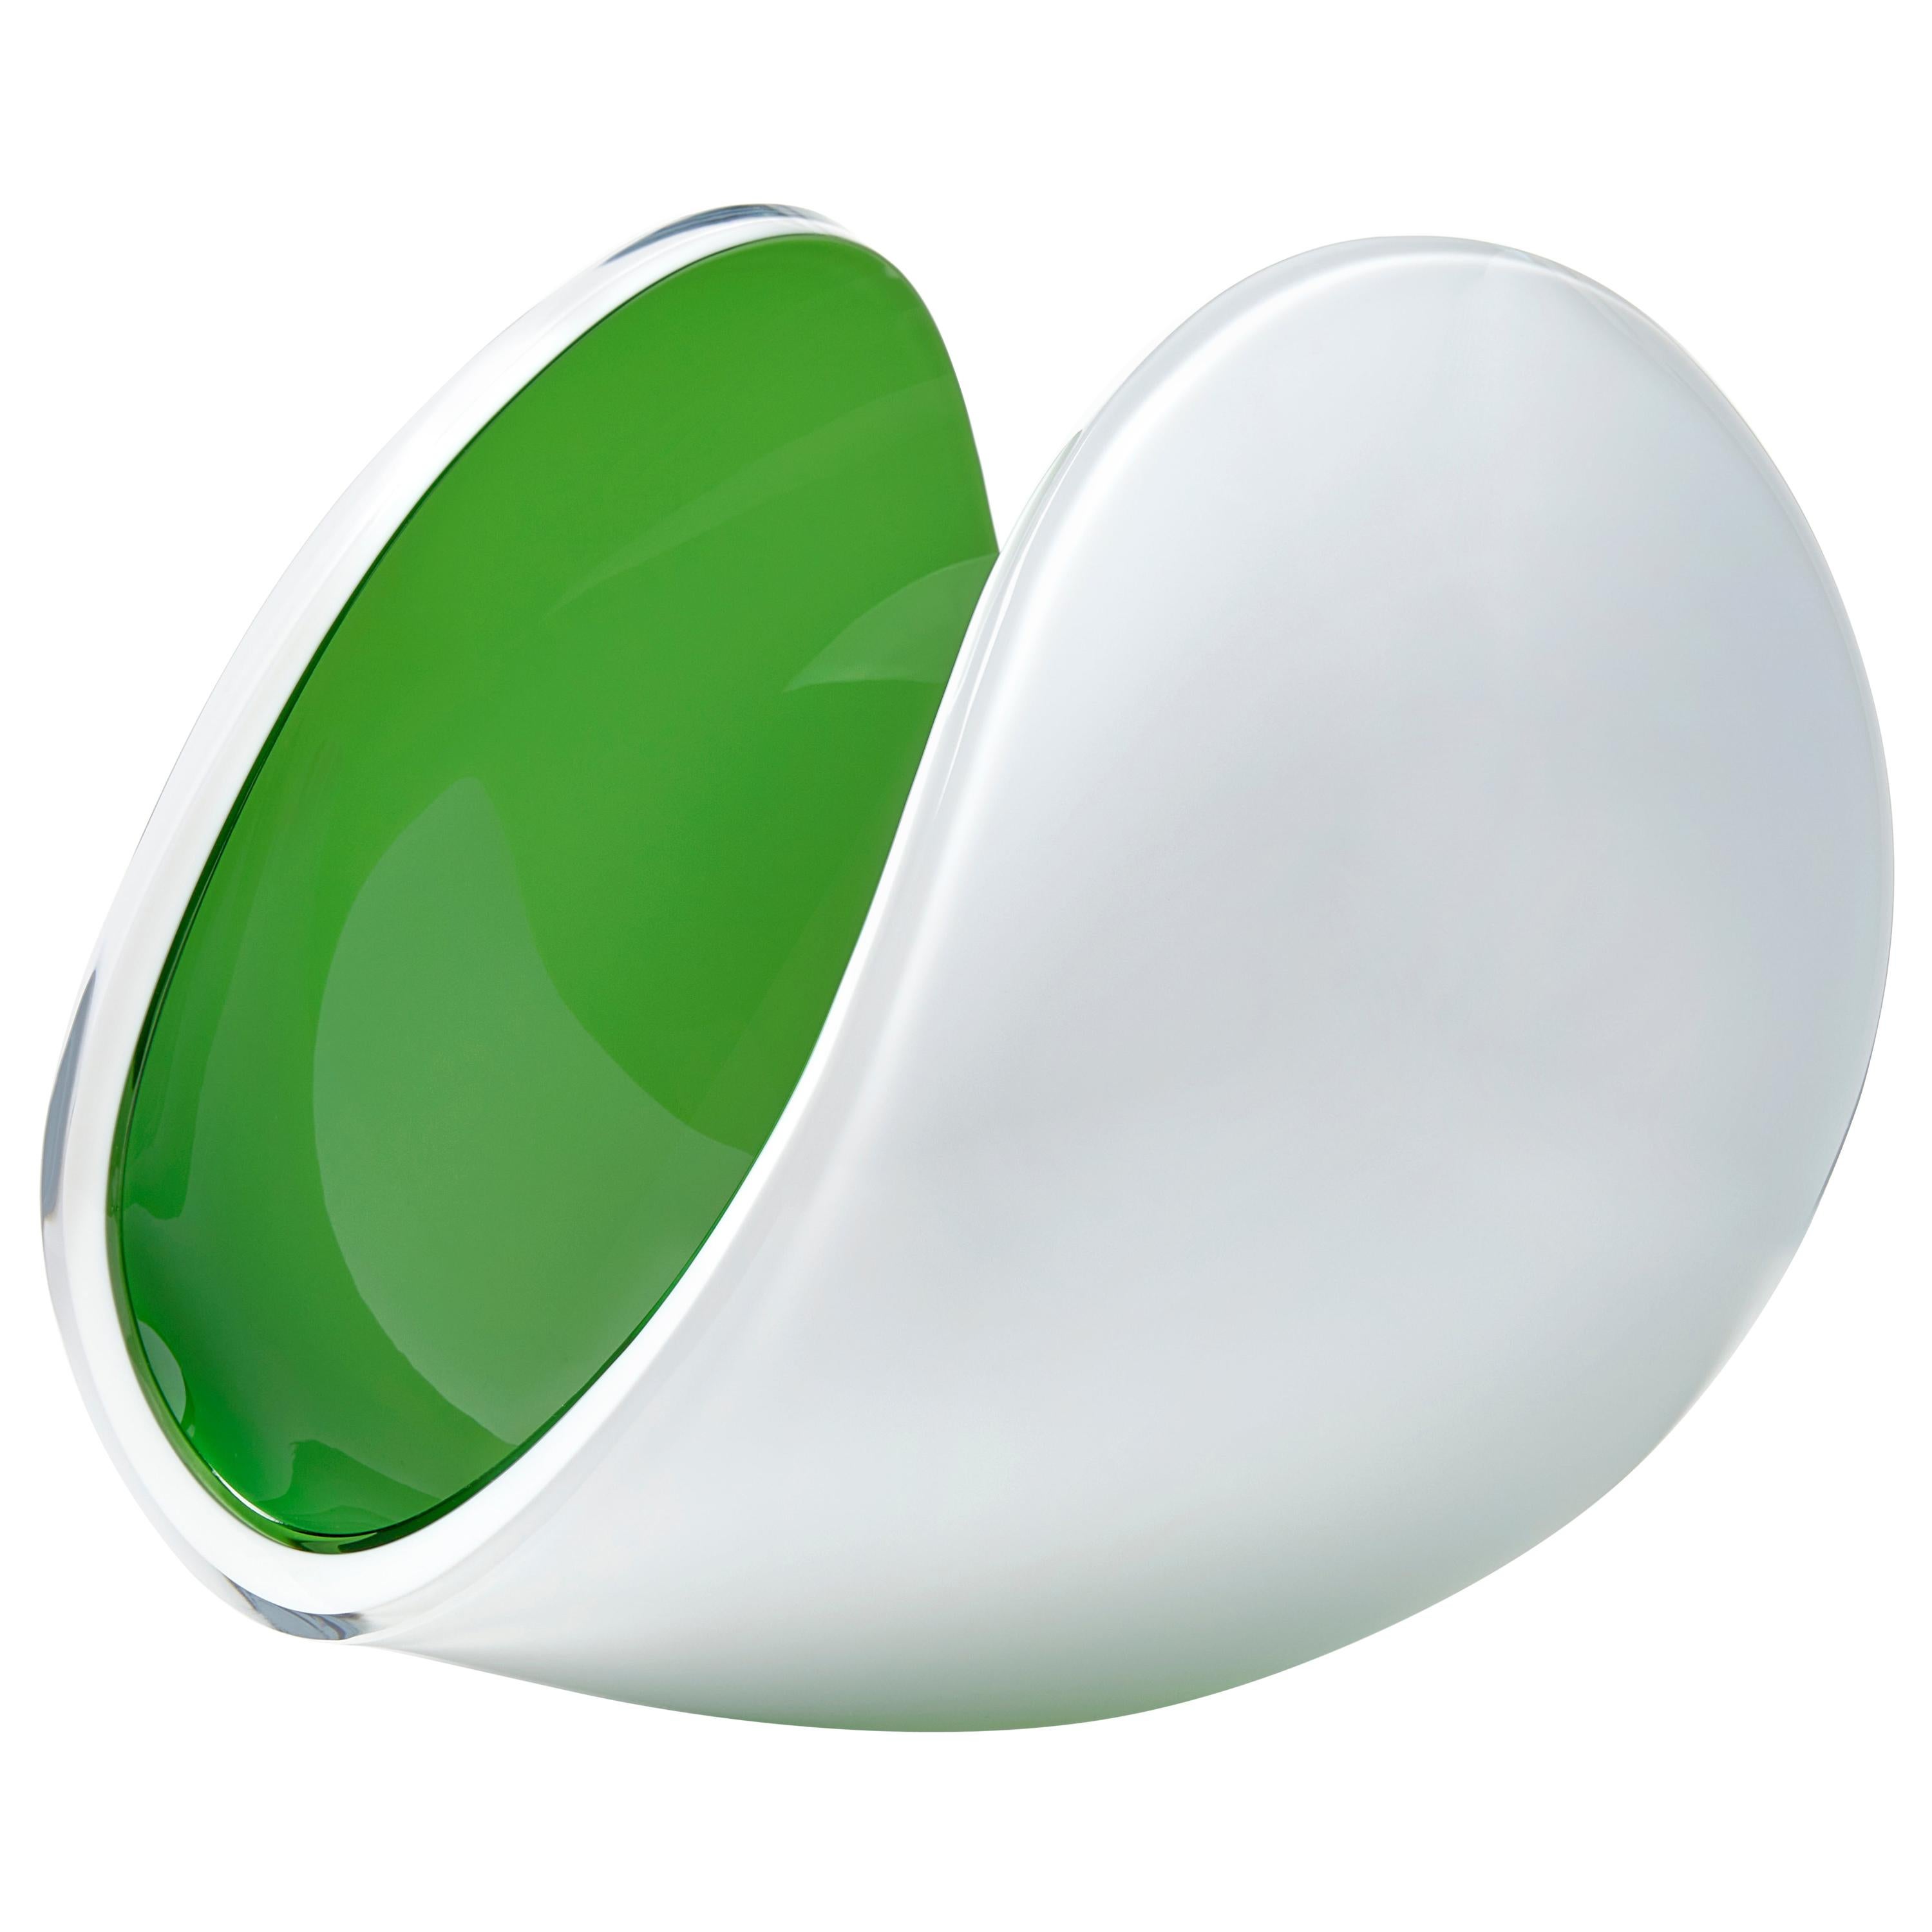 Planet in White and Apple Green, a Unique Art Glass Sculpture by Lena Bergström